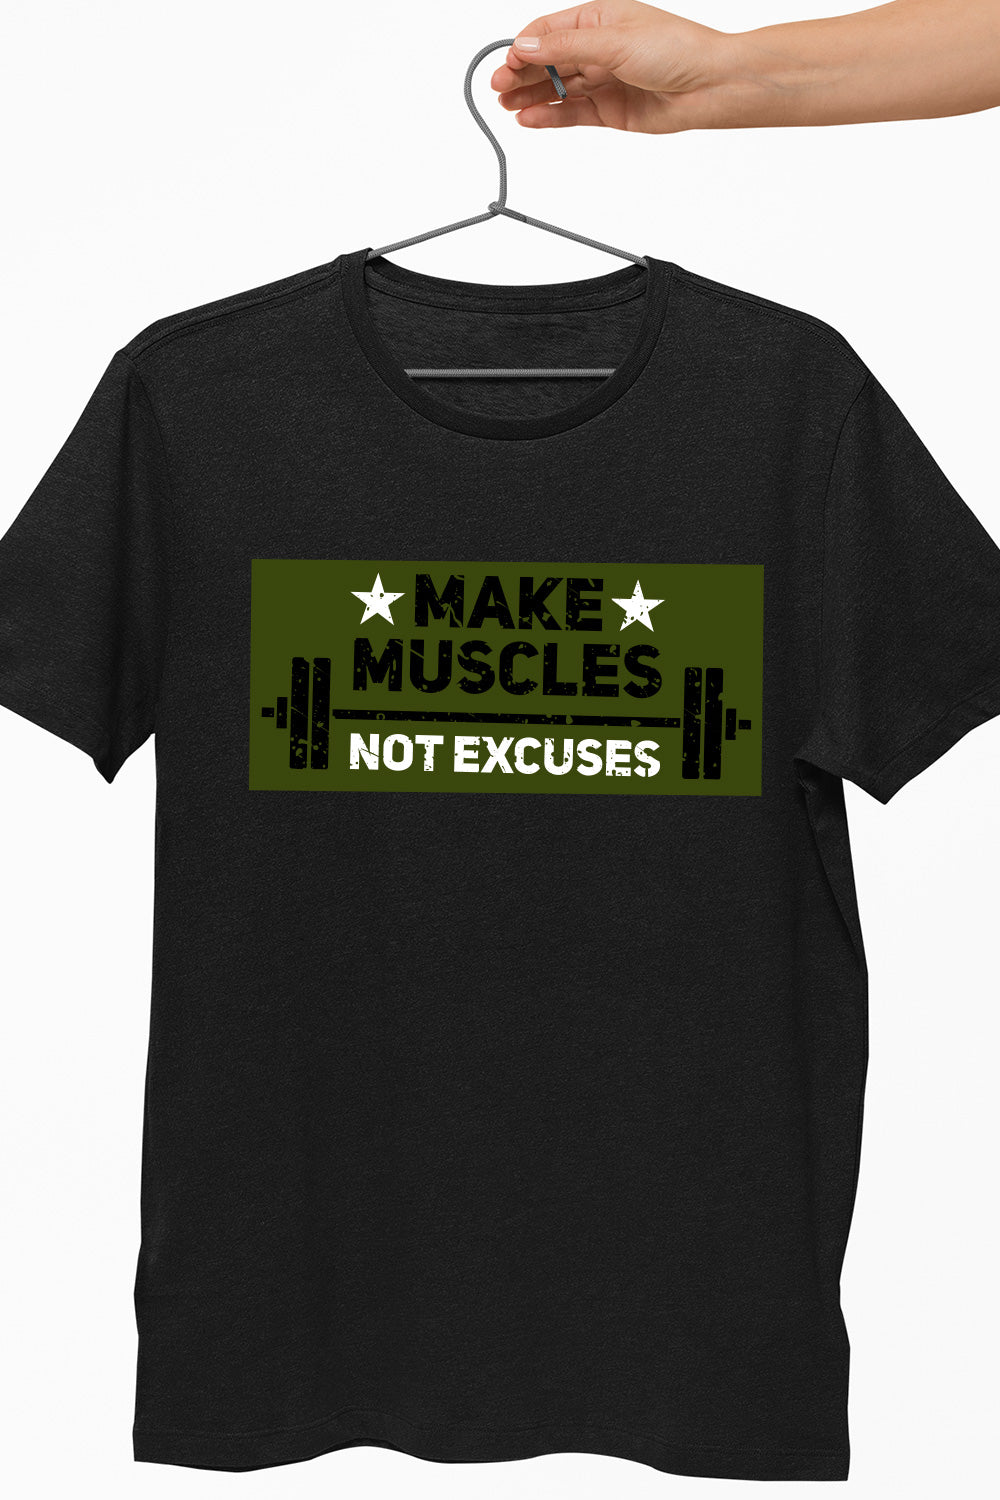 Make Muscles Not Excuses Black Dry-Fit T-Shirt